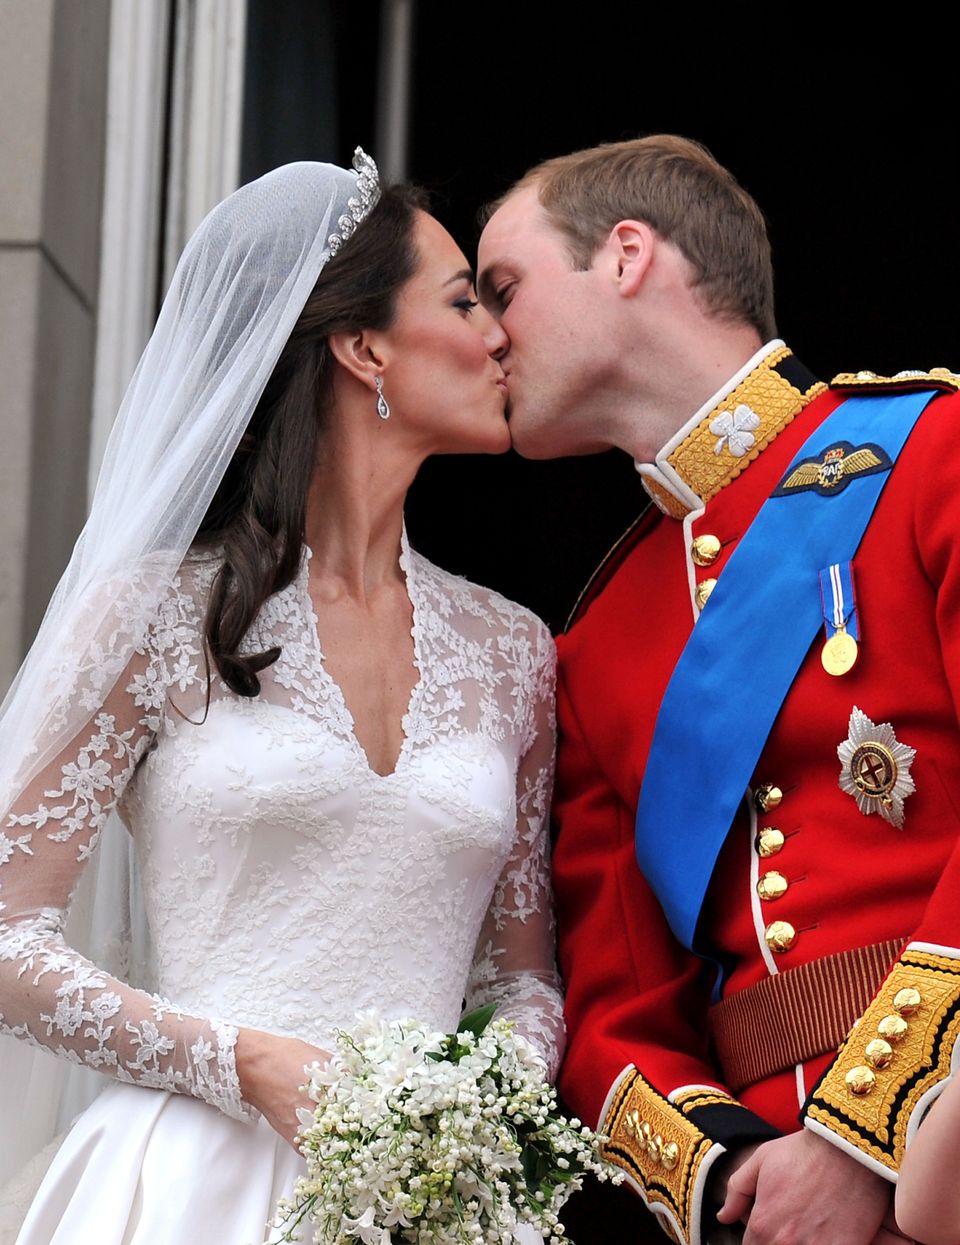 The wedding of Prince William and Catherine Middleton took place on 29 April 2011